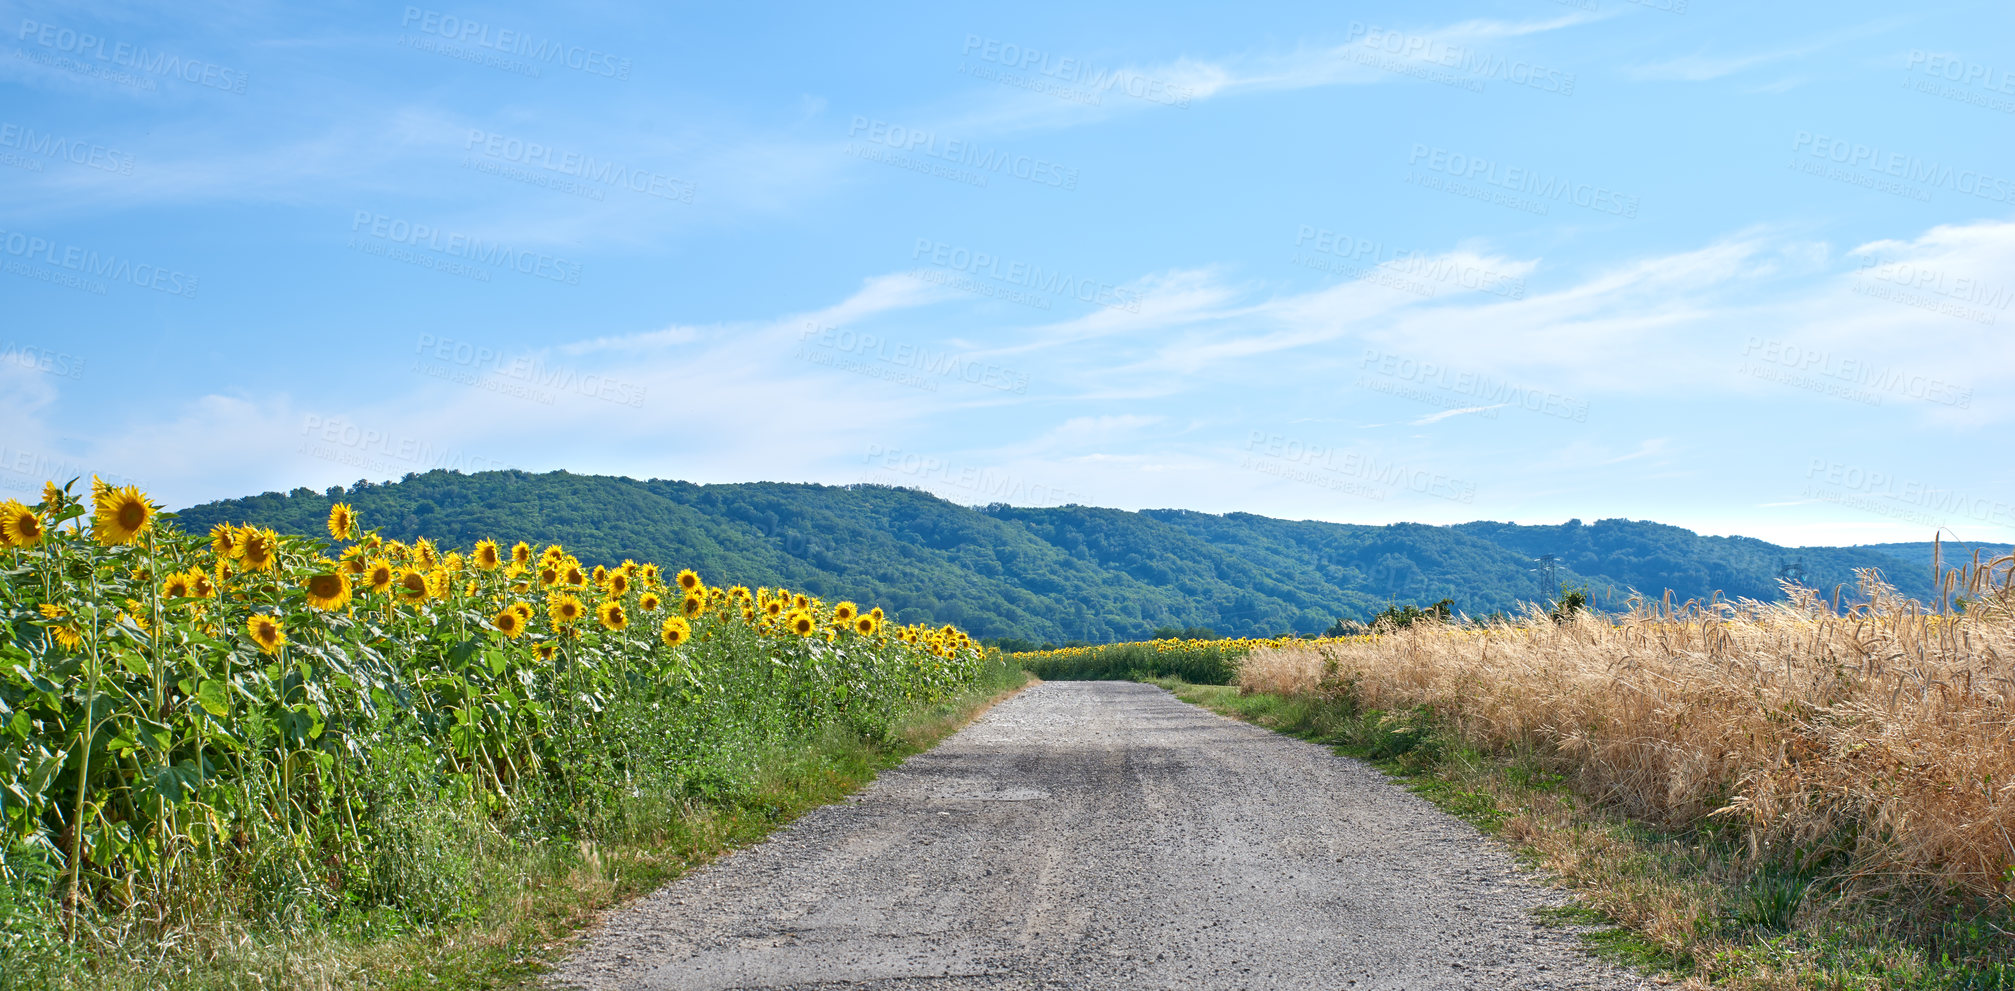 Buy stock photo Fields of sunflowers and reeds on an empty road or pathway against a blue sky in the countryside. Scenic landscape view of a secluded street in a natural area. Grassland with plants and vegetation